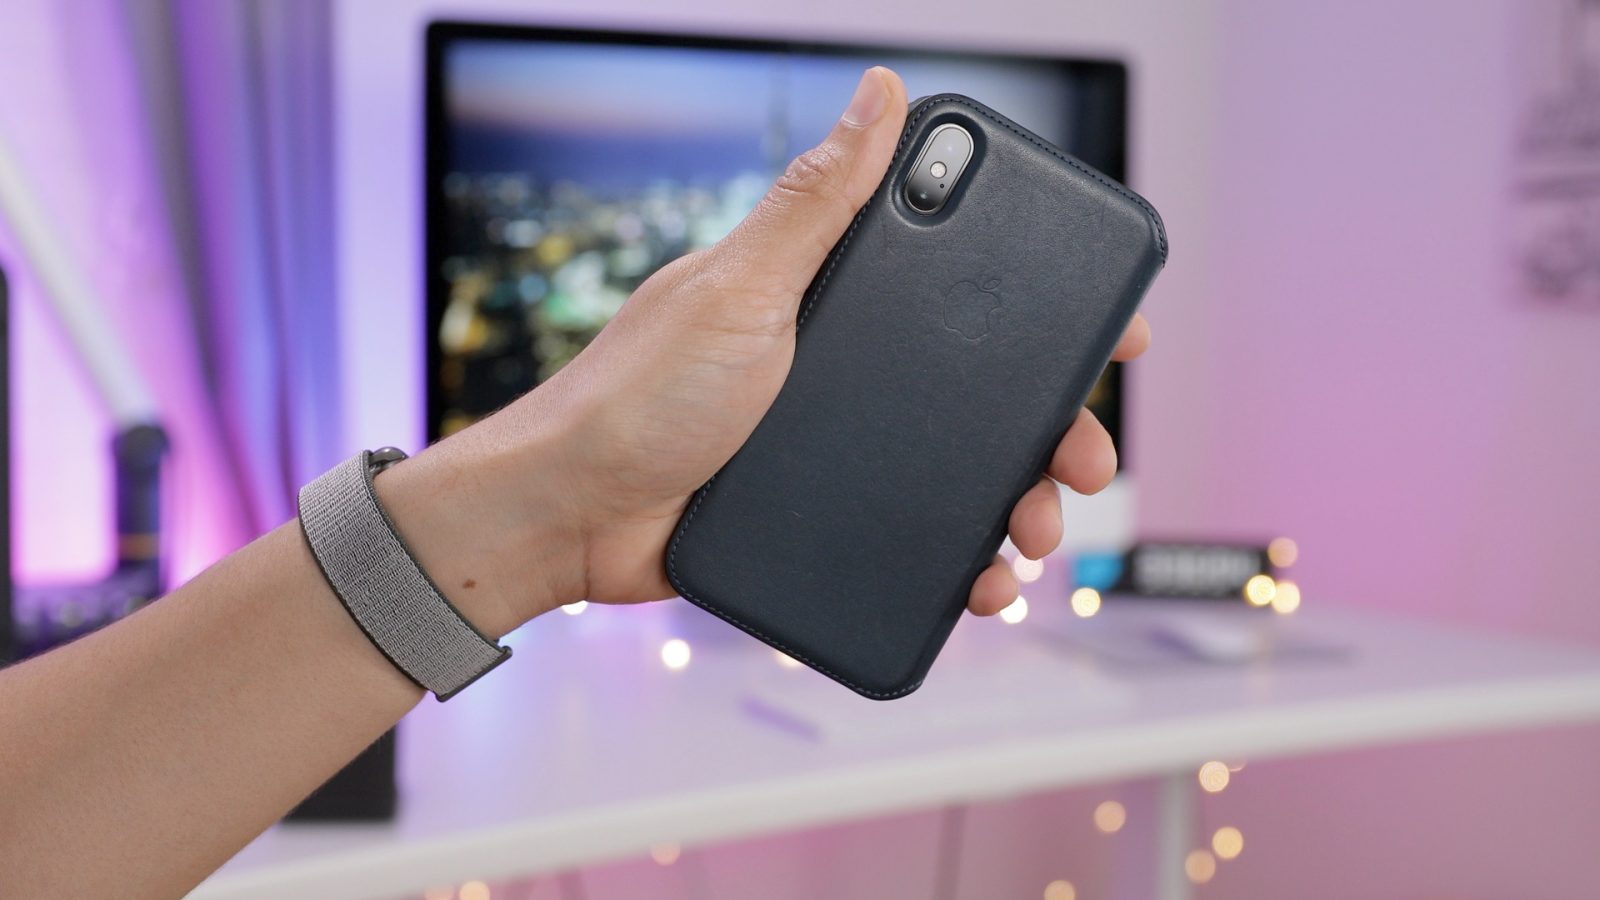 Hands-on: iPhone X Leather Folio Case - like a Smart Case for your iPhone X  [Video] - 9to5Mac